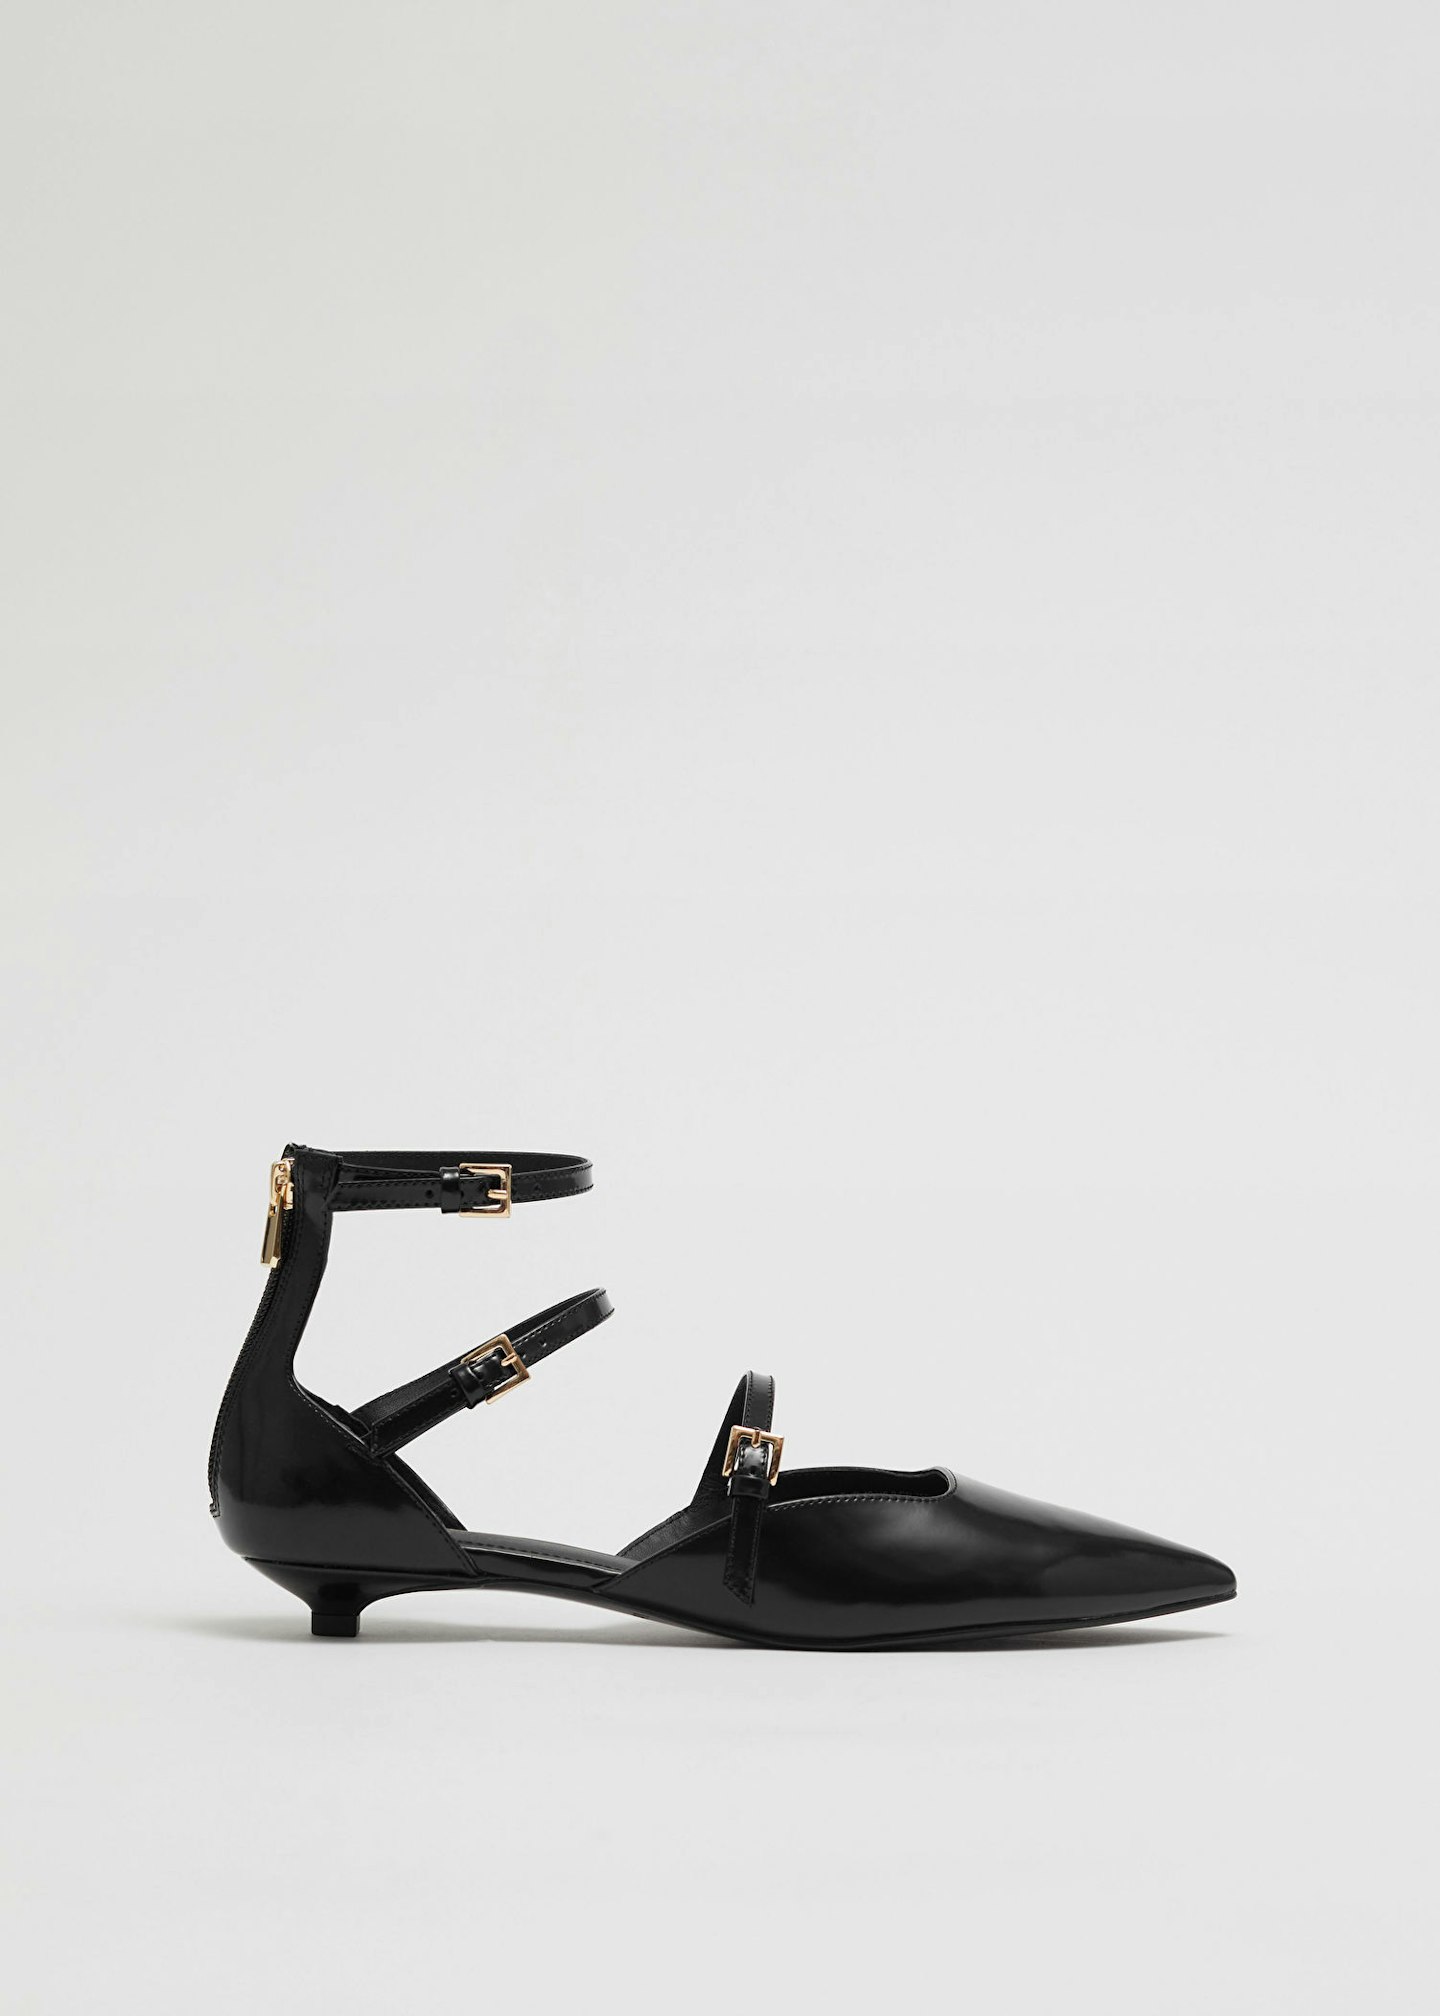 & Other Stories, Point-Toe Leather Pumps